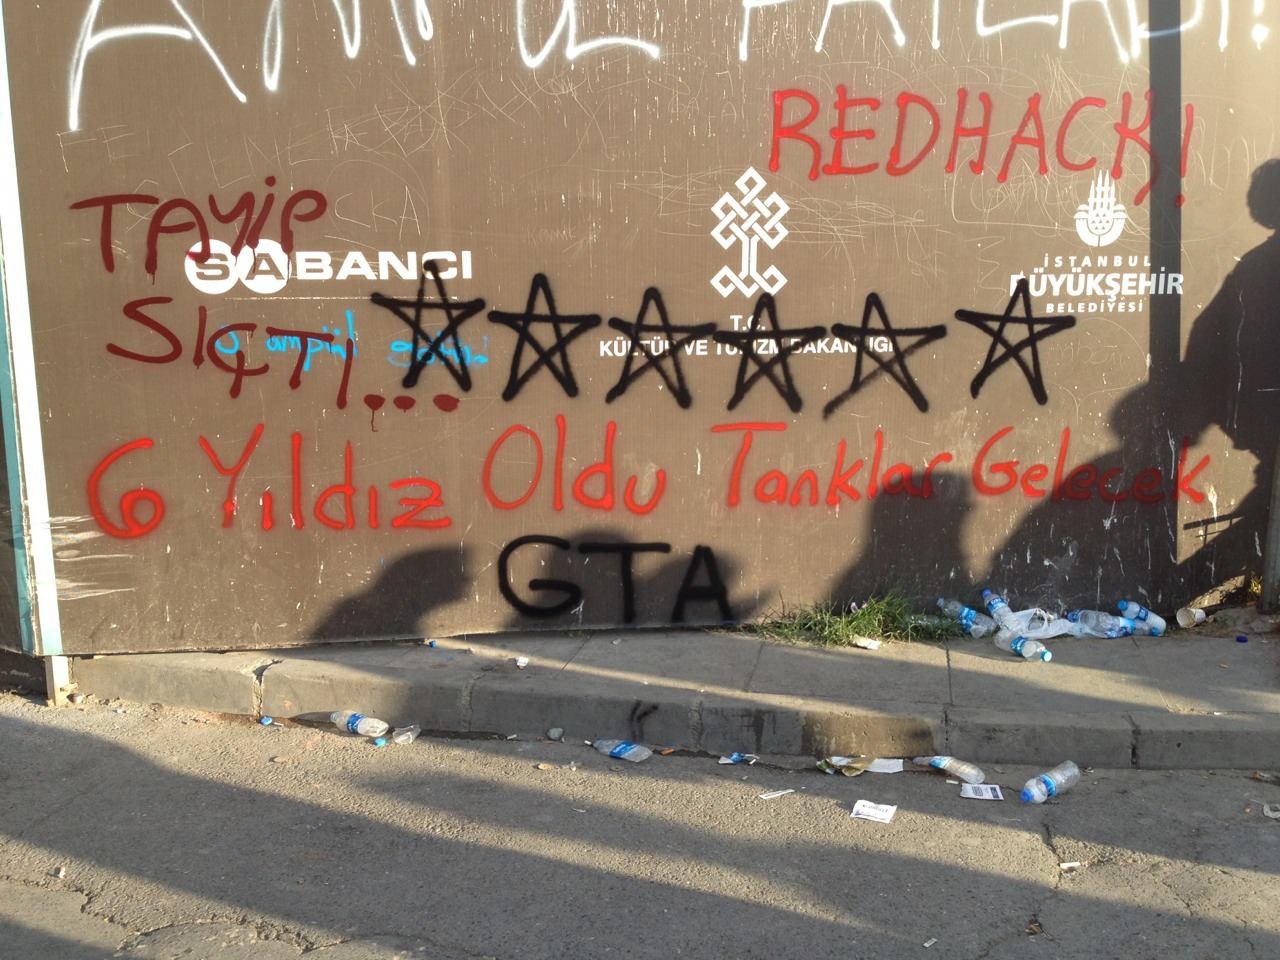 A graffiti in İstanbul referencing the game GTA.
“We now have six stars. Tanks will be coming soon”